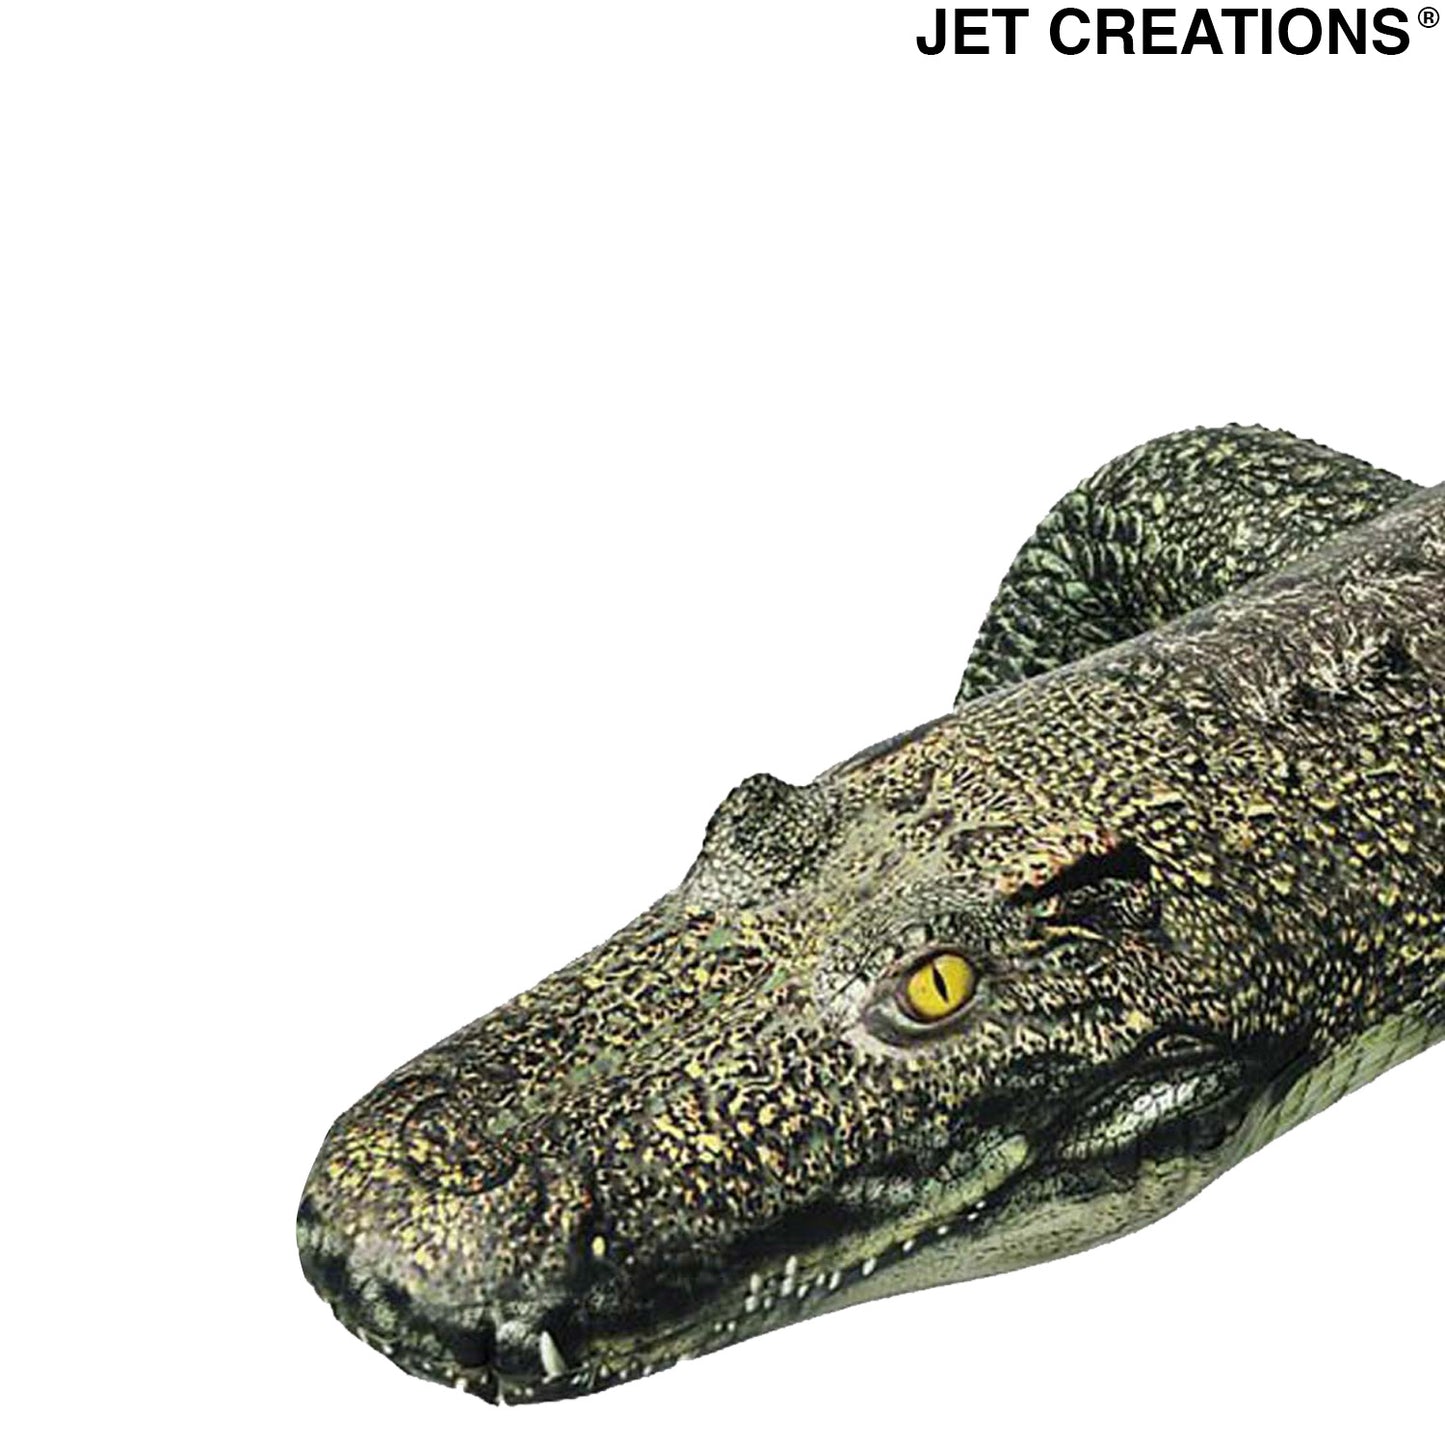 Inflatable Alligator, 49 inch Long [AN-GATOR]